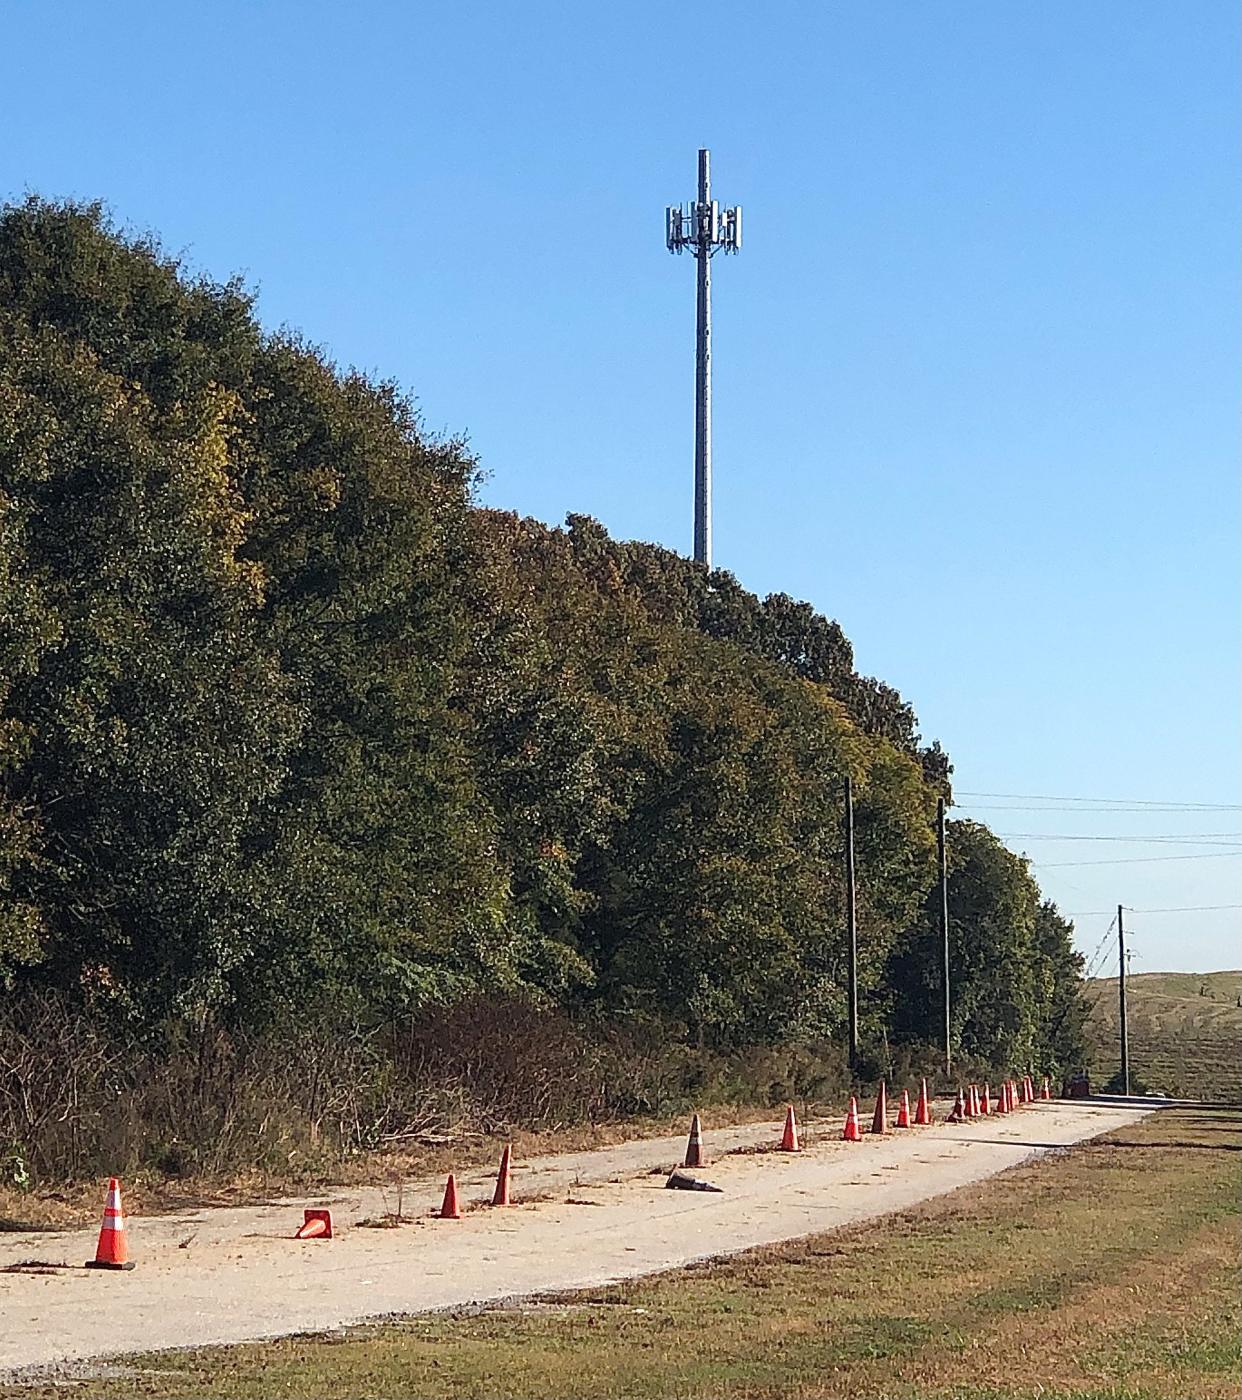 County staffers said this is a cell phone tower above the trees at the Enoree Residential Waste and Recycling Center on Anderson Ridge Road.